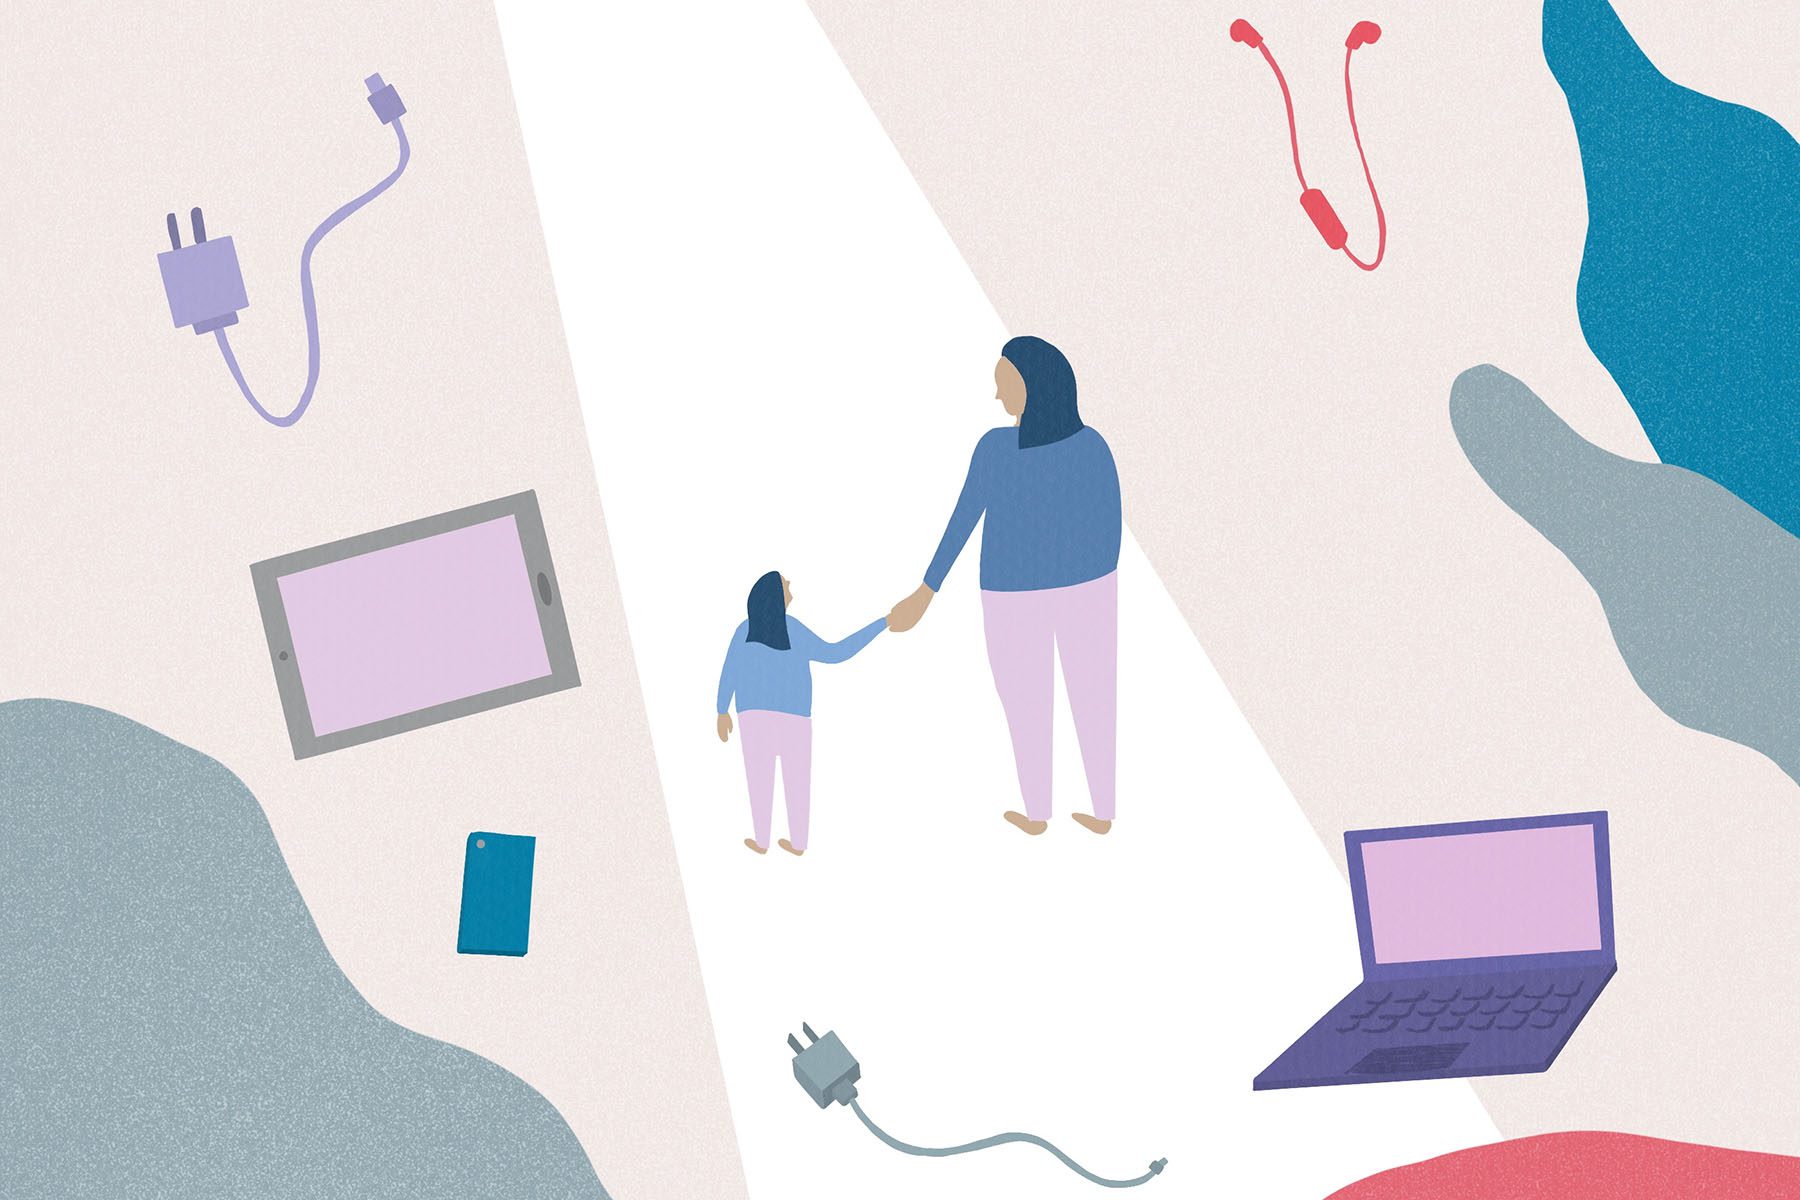 Illustration of a mother and child holding hands and looking at each other, they are walking down a path and surrounded by tablets, computers and different chords and plugs.